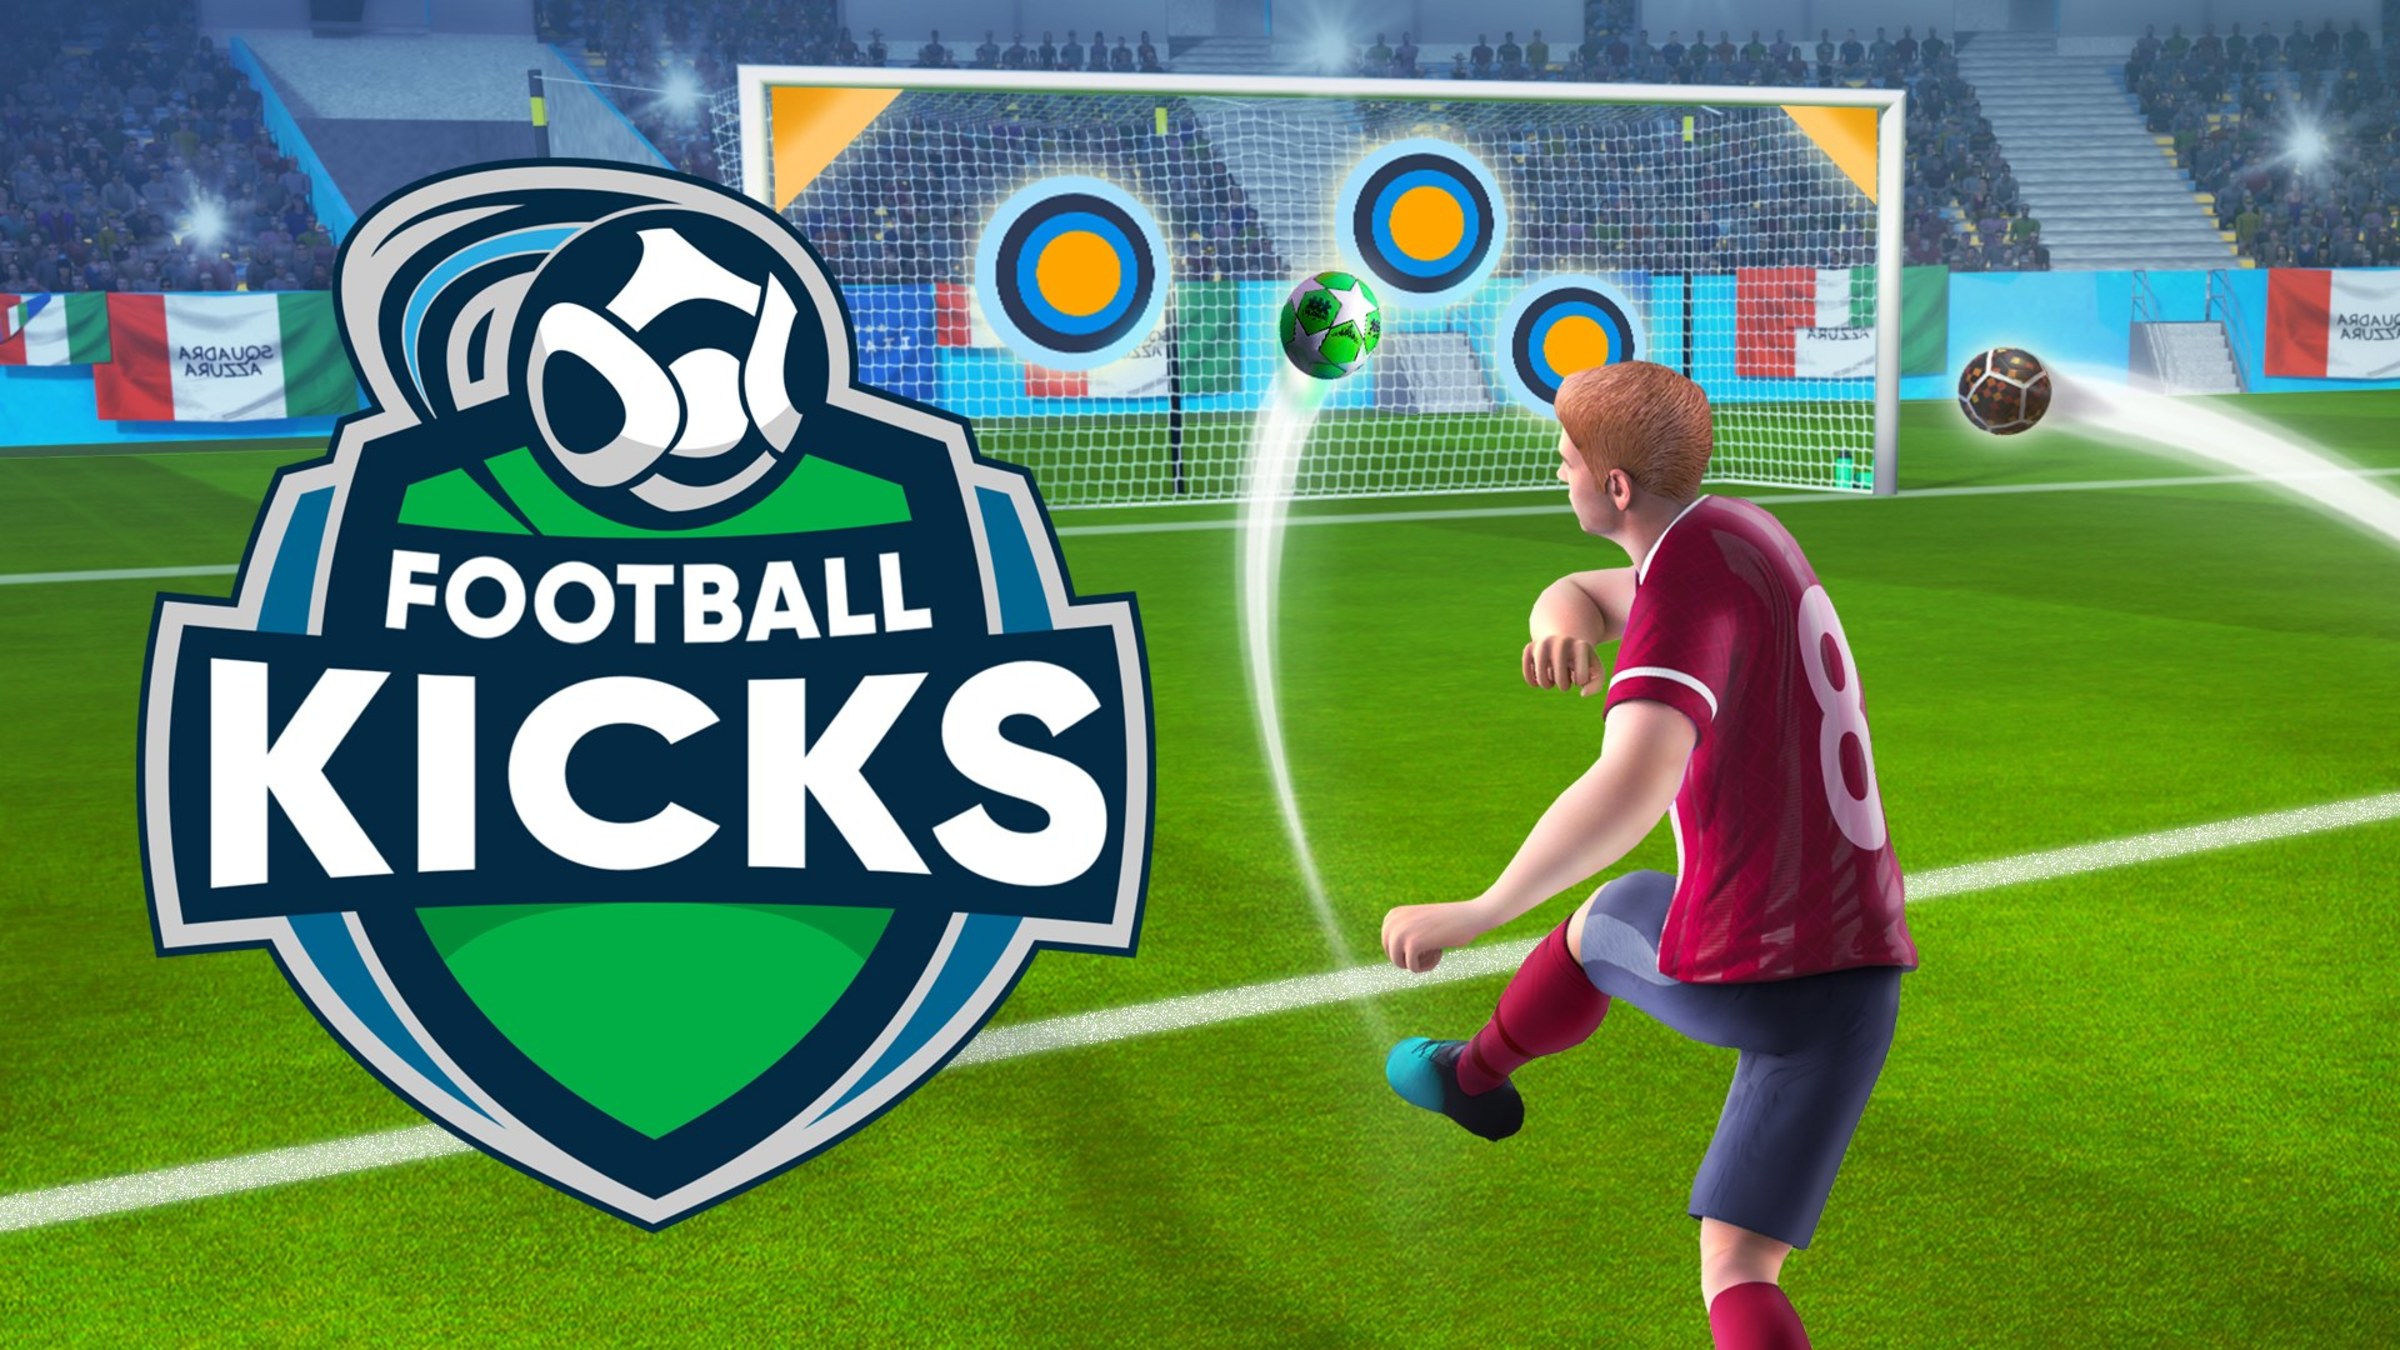 Penalty Shooters 2 APK for Android - Latest Version (Free Download)